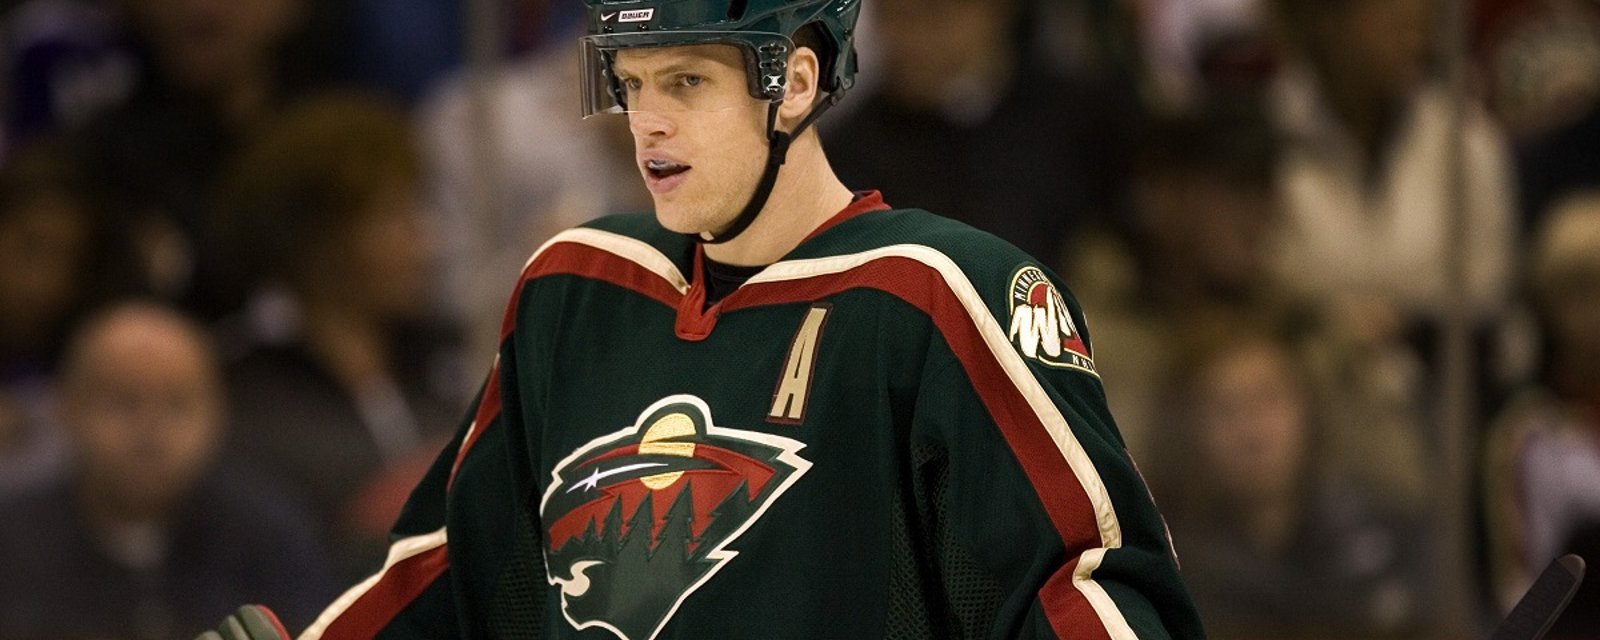 Update on the mysterious disappearance of former NHL defenseman Kim Johnsson.